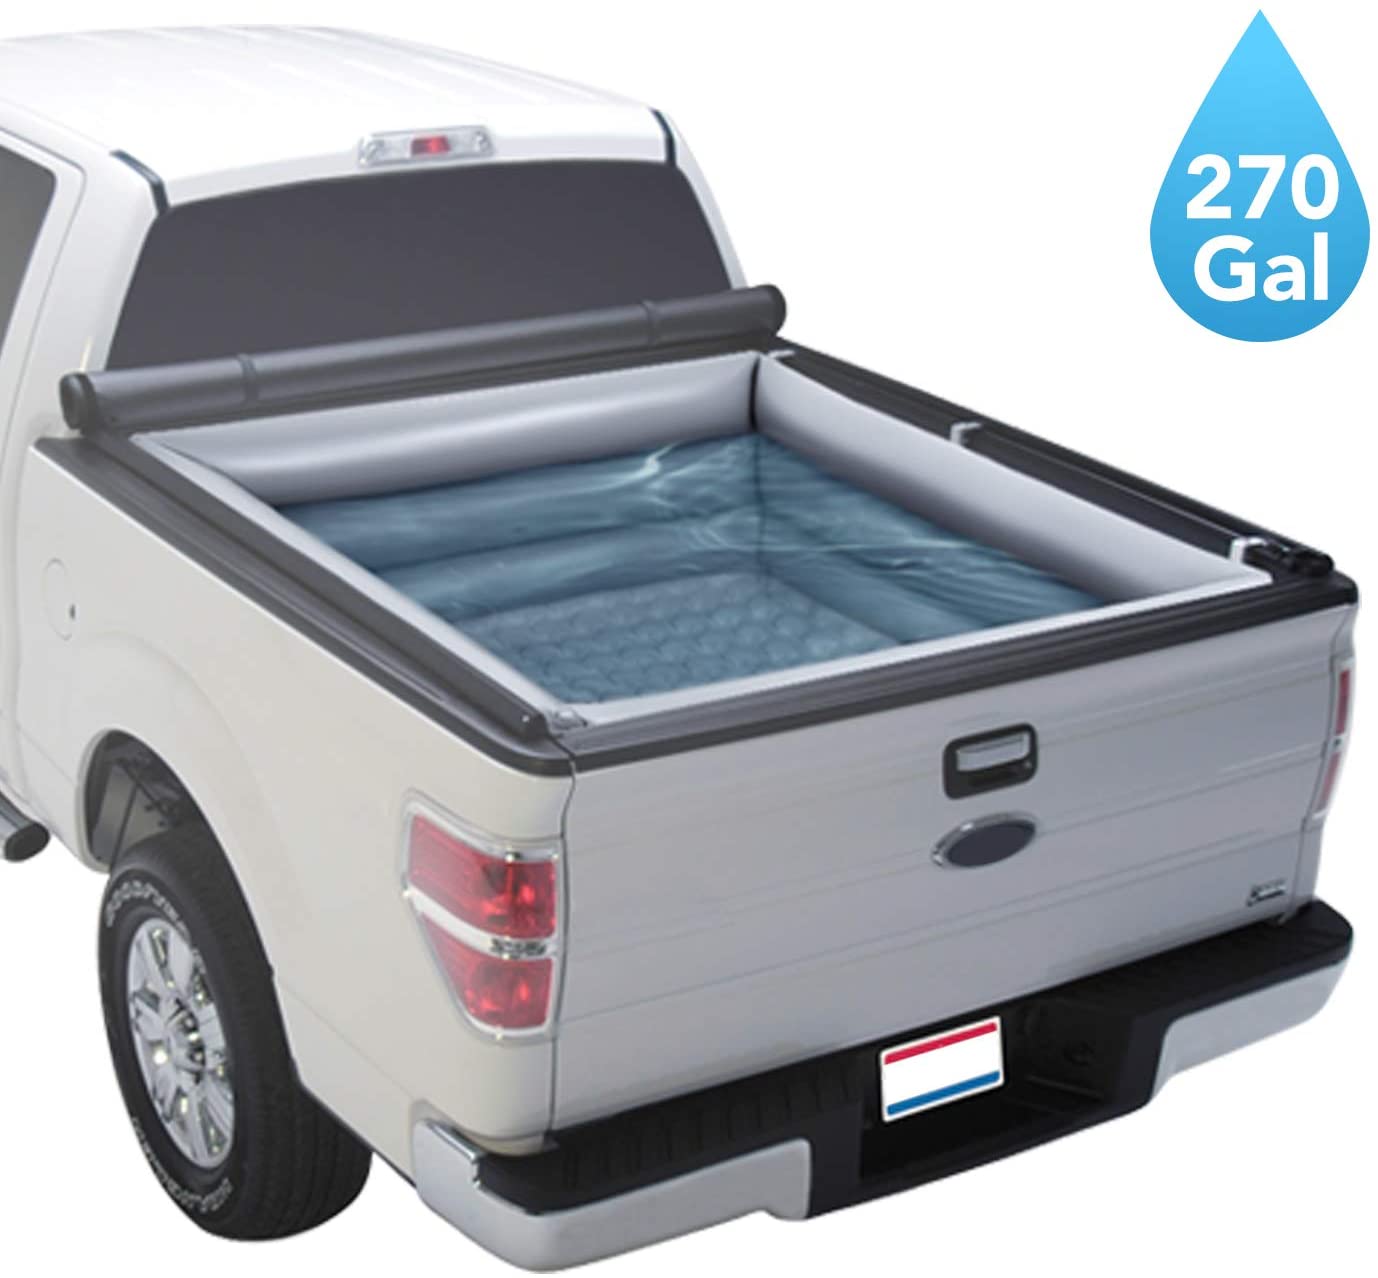 GOLOHO Inflatable Truck Bed Pool